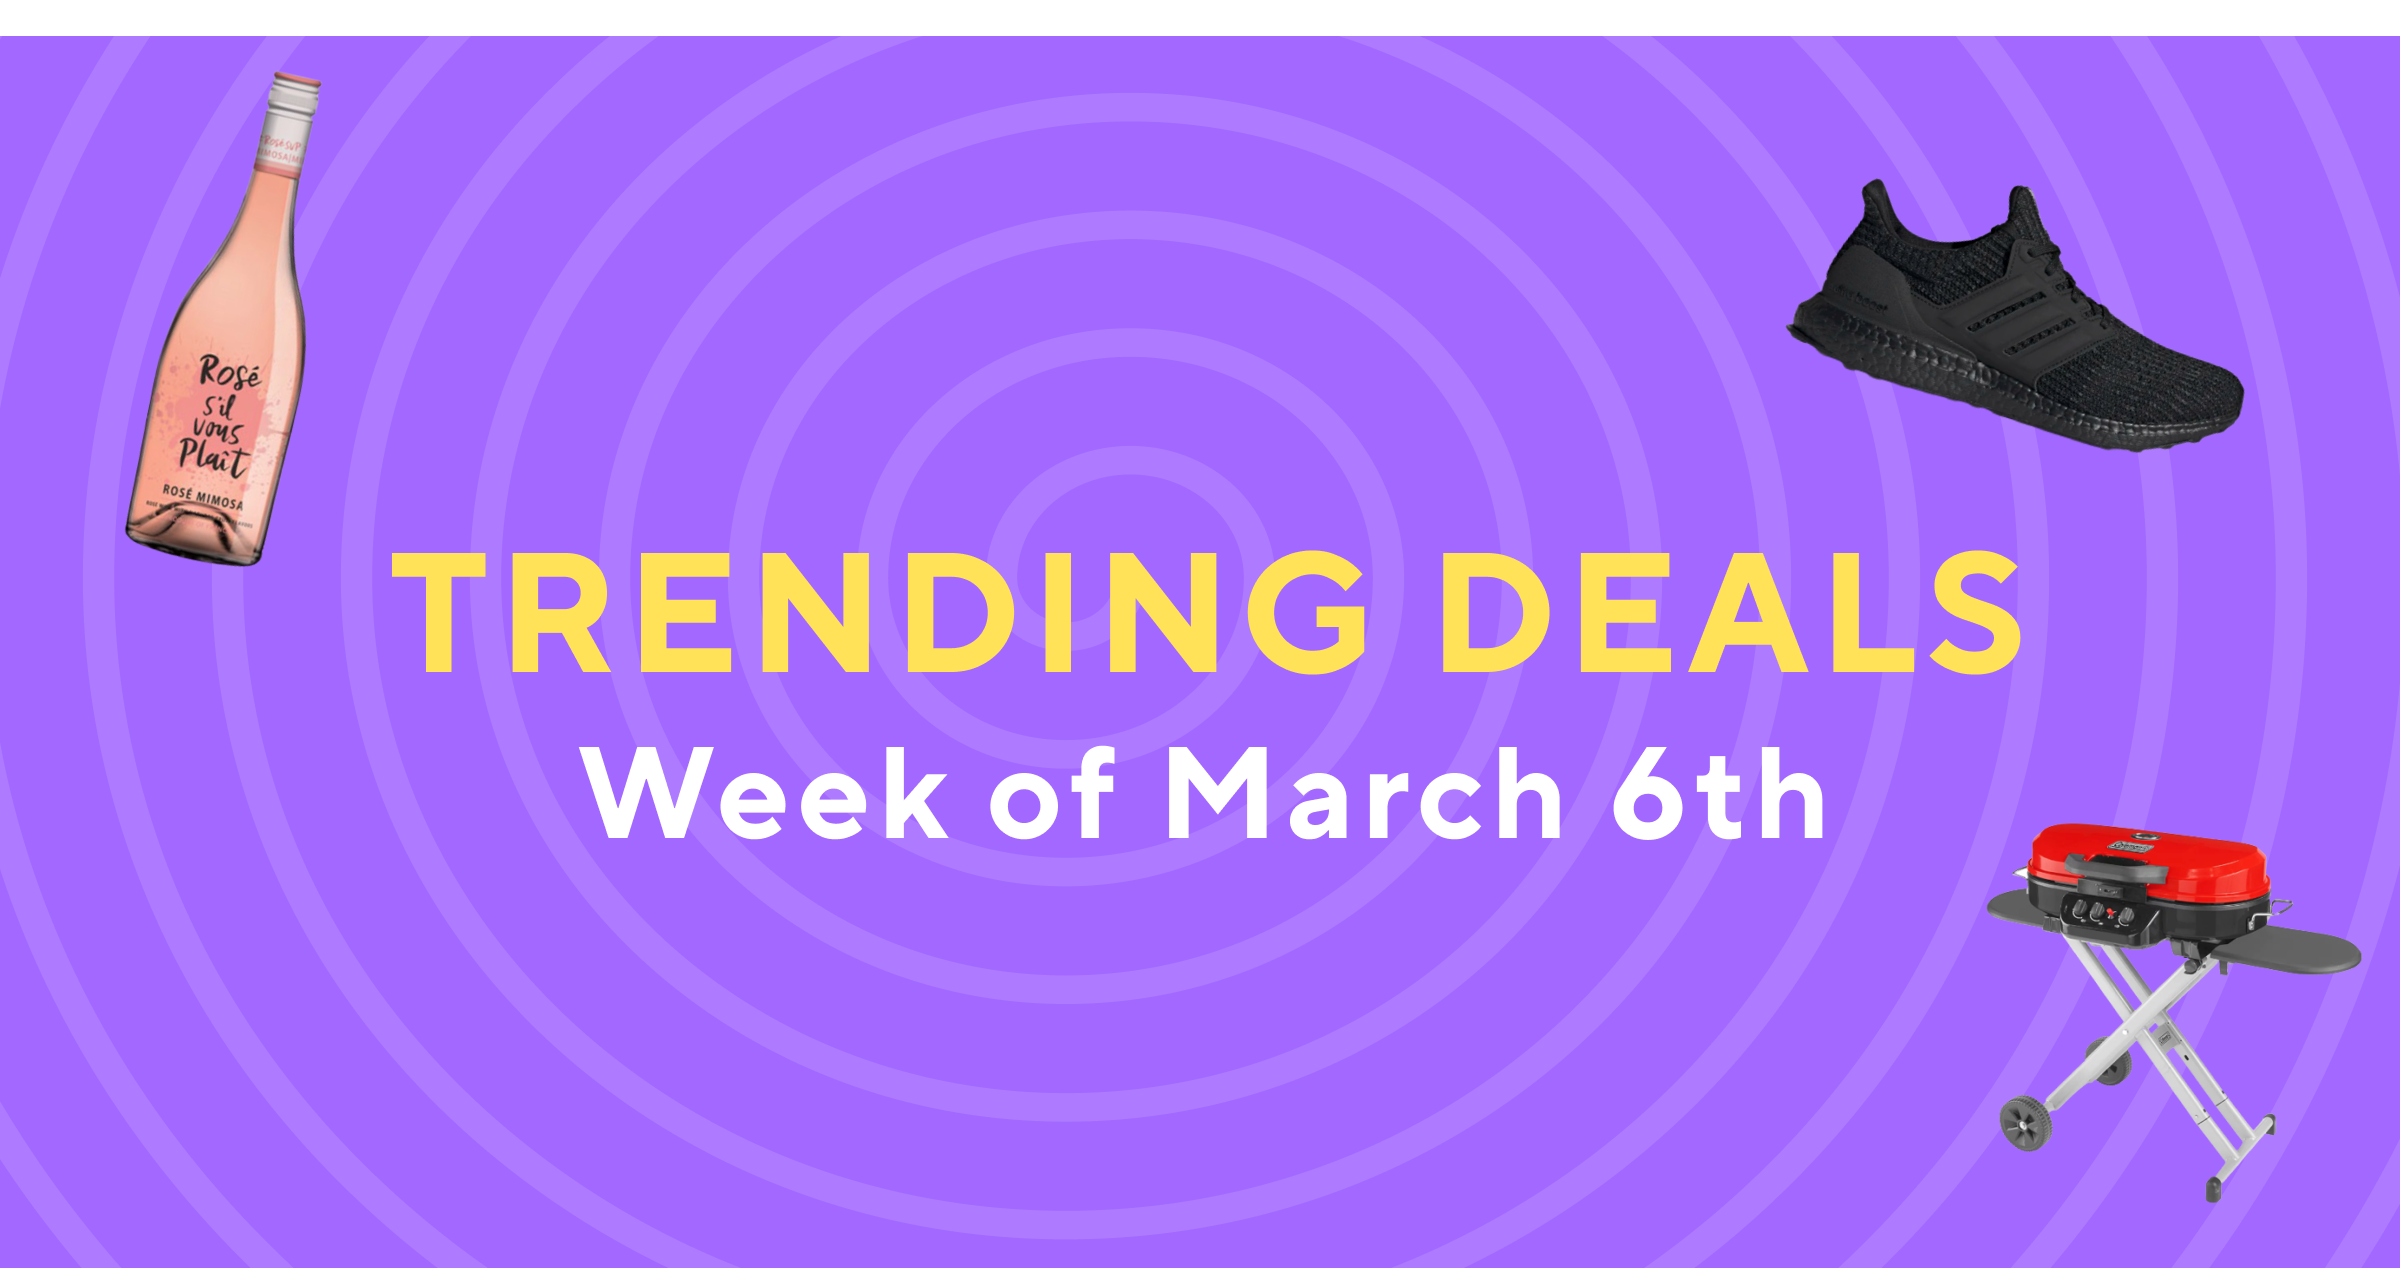 Trending Rewards This Week: Up to 10% Back at Marriott, Eight Sleep, and More